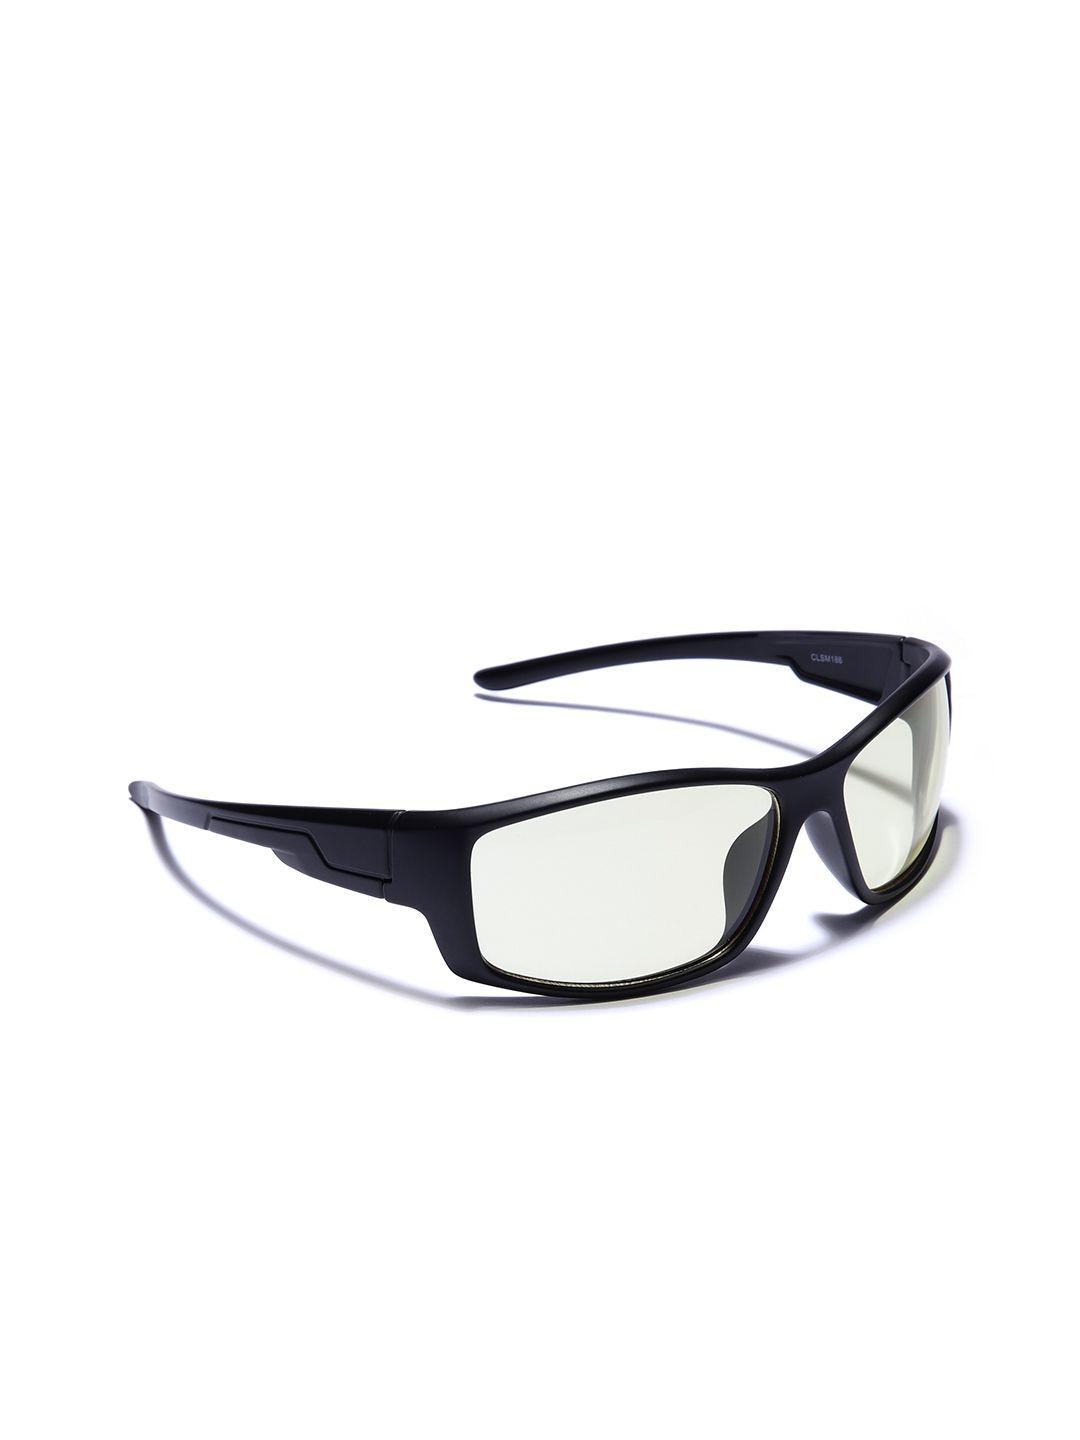 carlton london men sports sunglasses with uv protected lens - clsm186